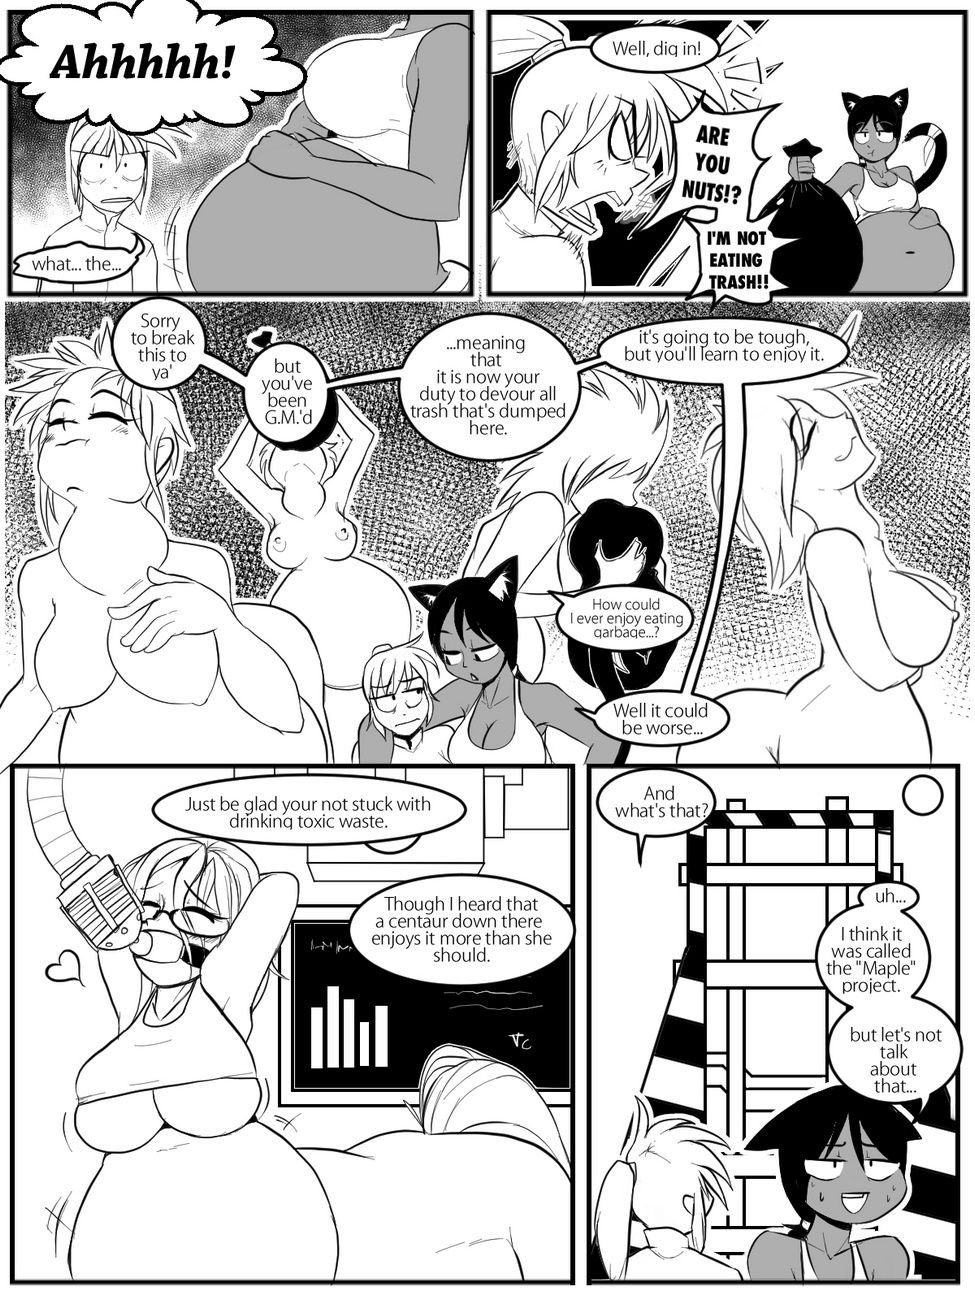 Clean-Up Duty page 8